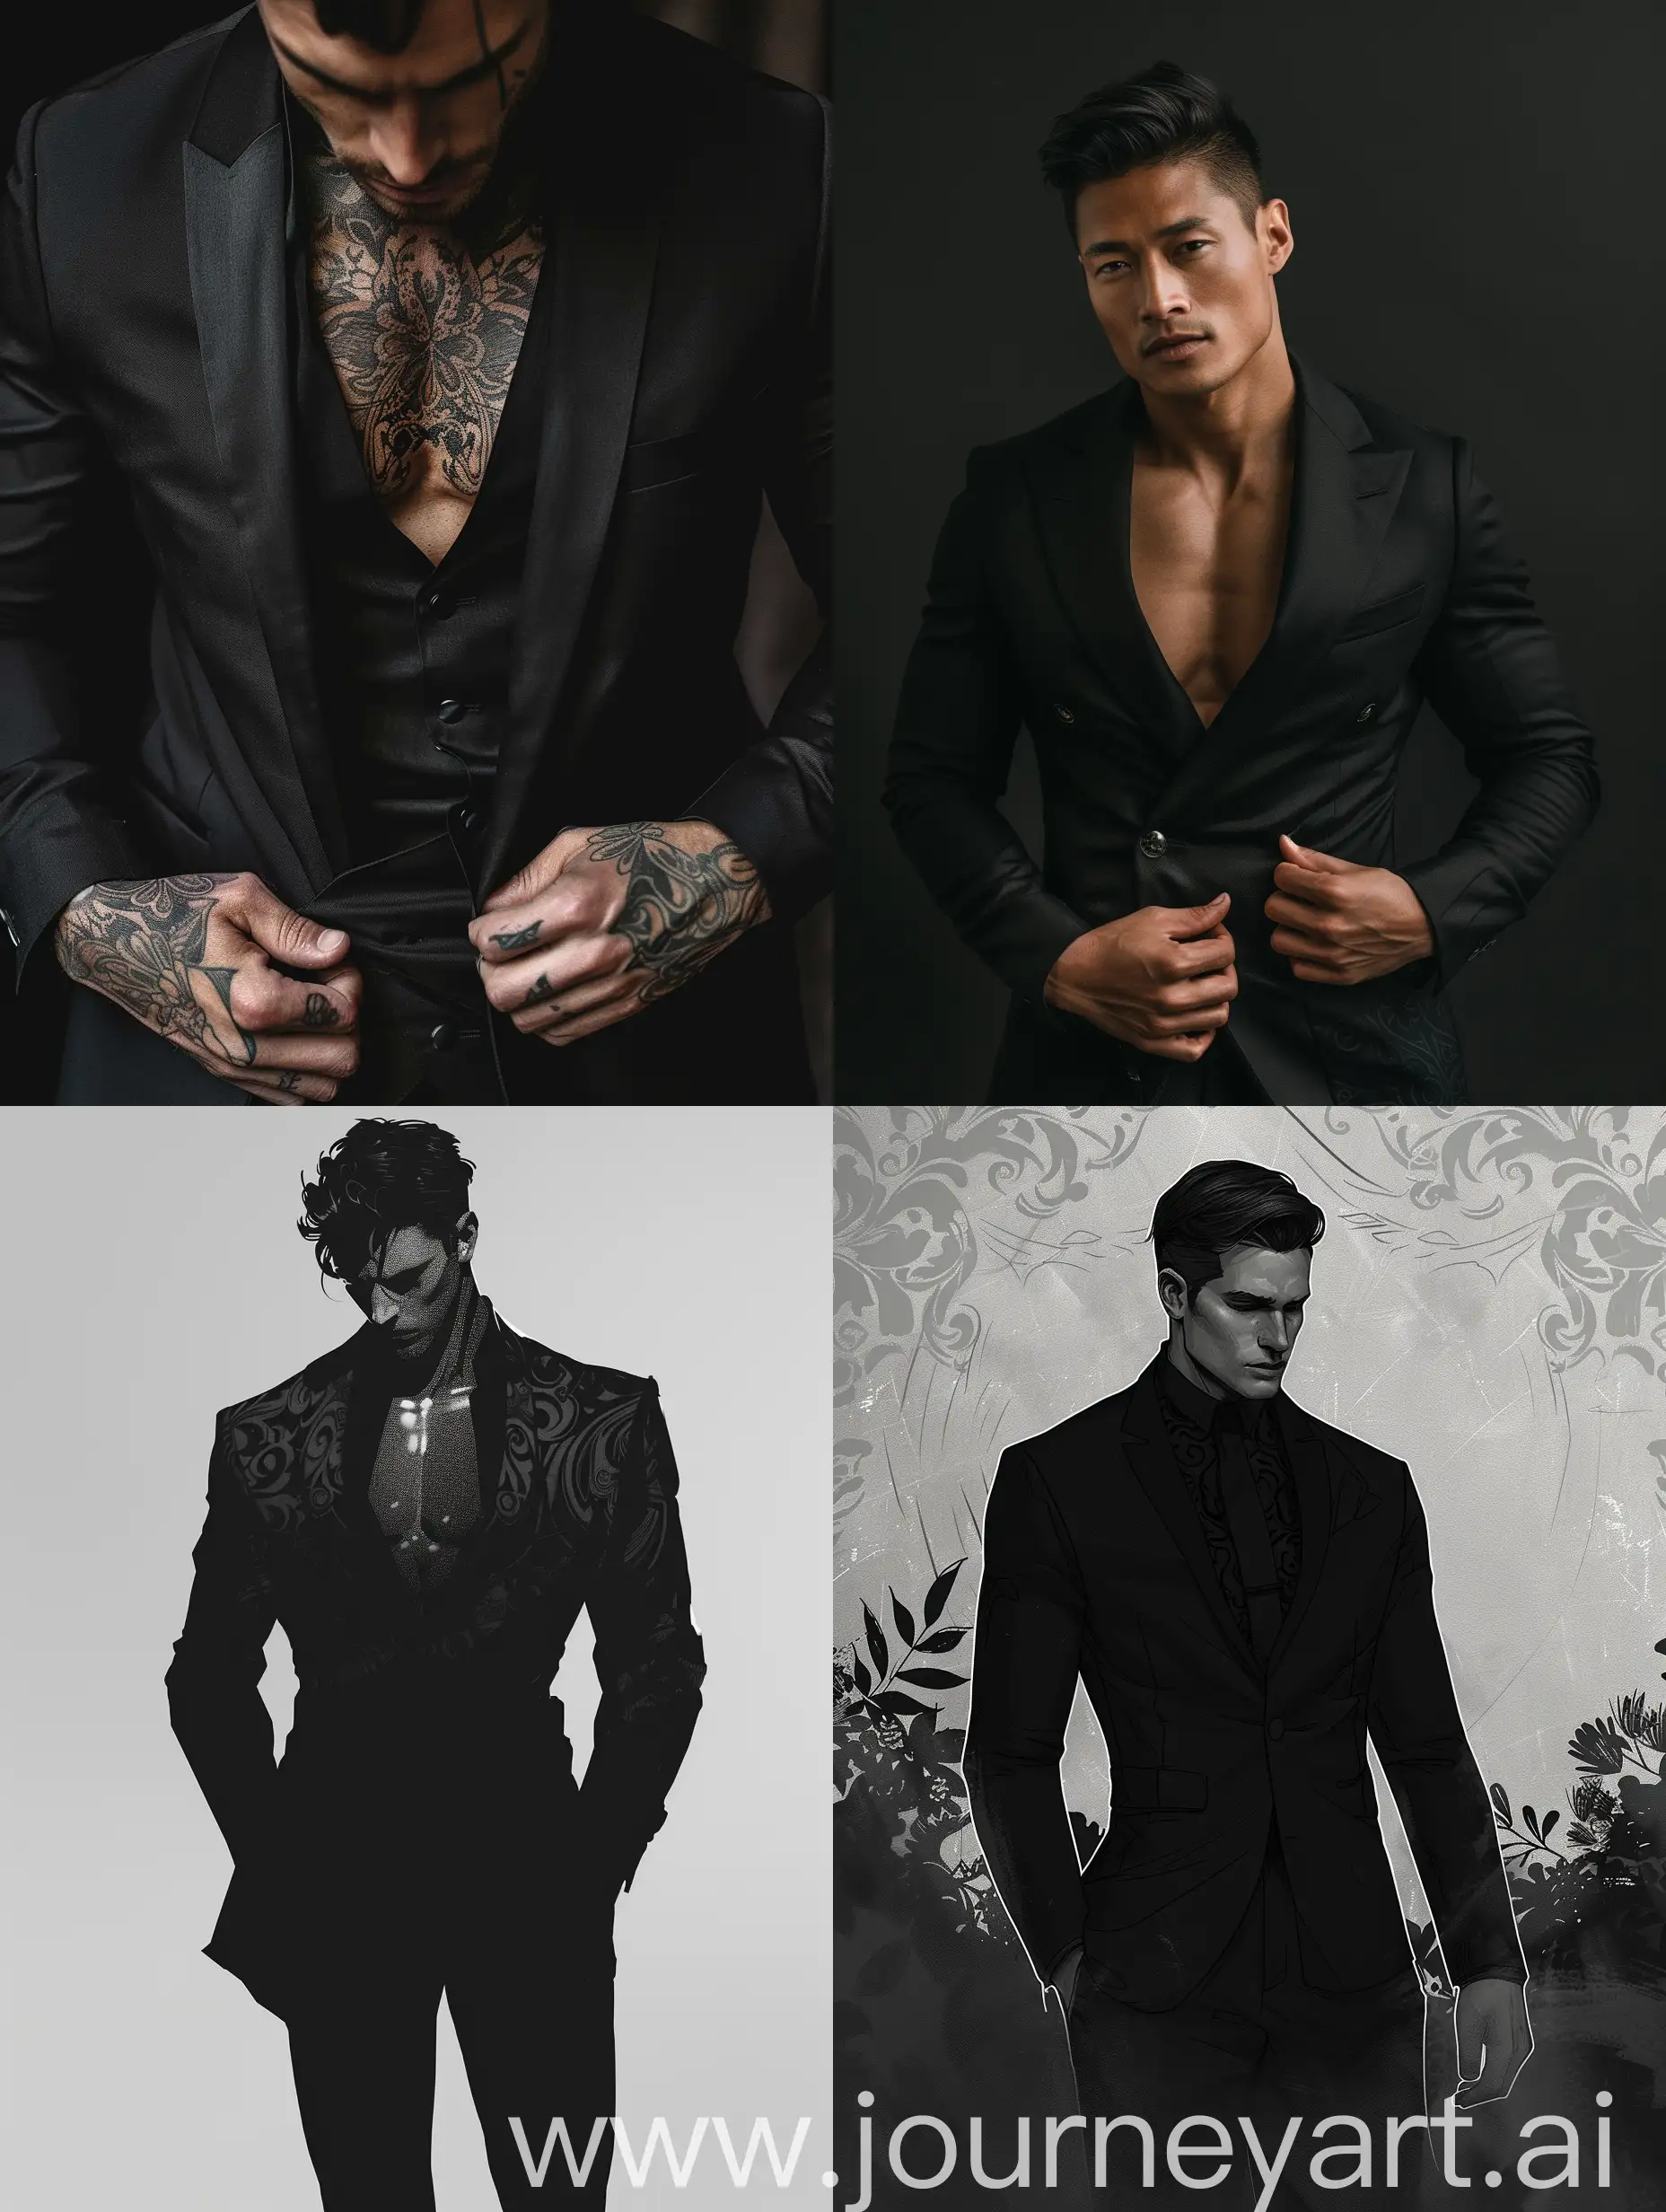 ink black suit, longing aesthetic, nostalgic aethetic, minimal Damask, muscle physique, flexible suit, tight-fitted suit